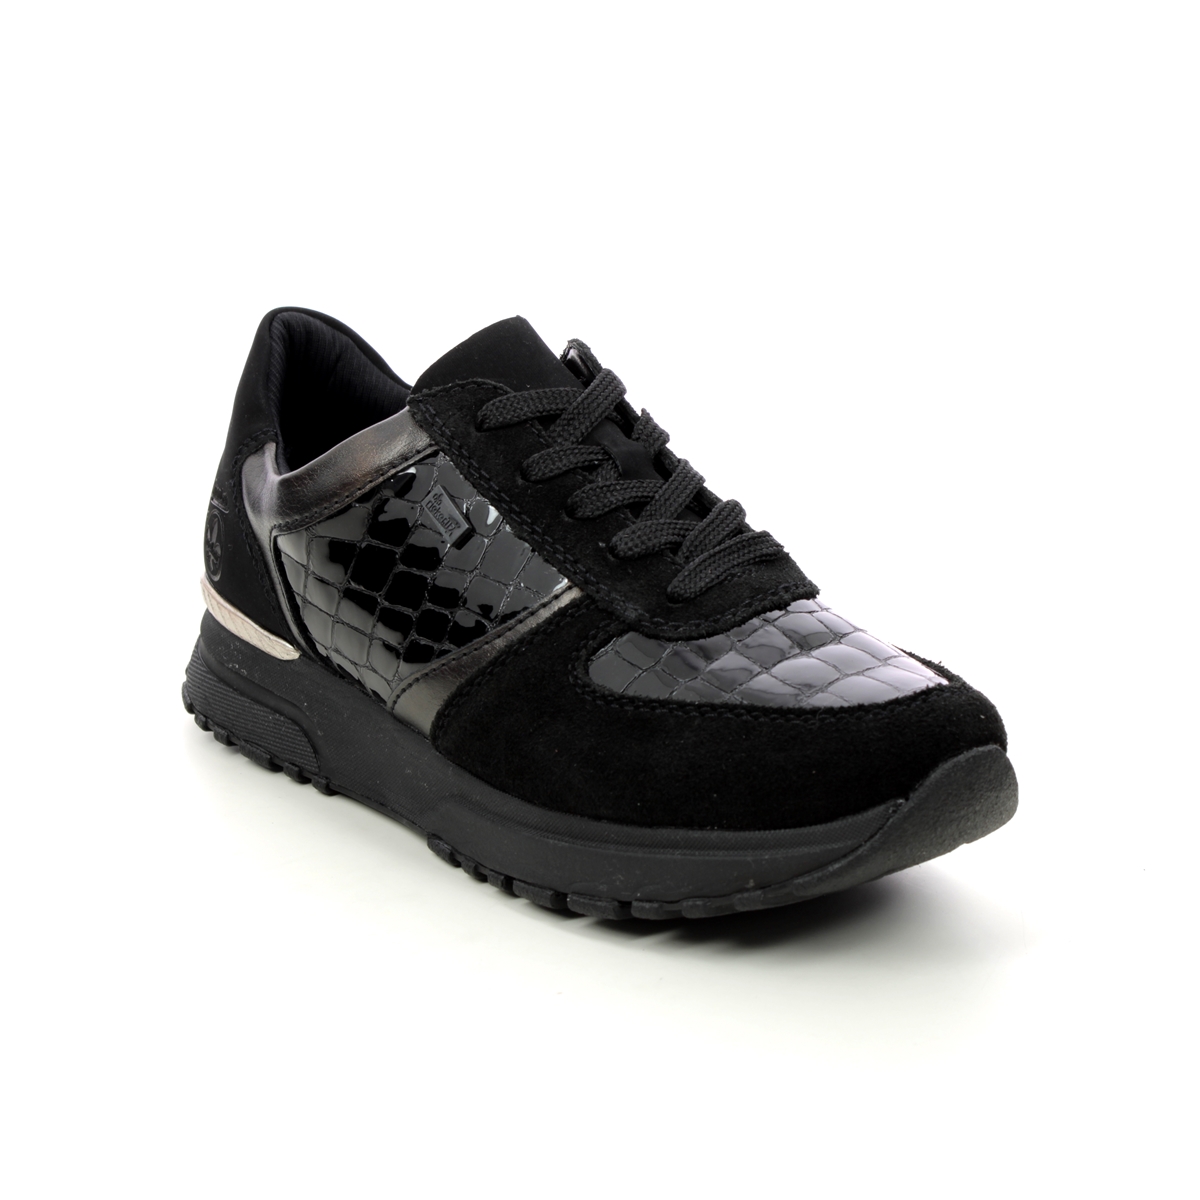 Rieker N7412-00 Black patent suede Womens trainers in a Plain Leather and Man-made in Size 39